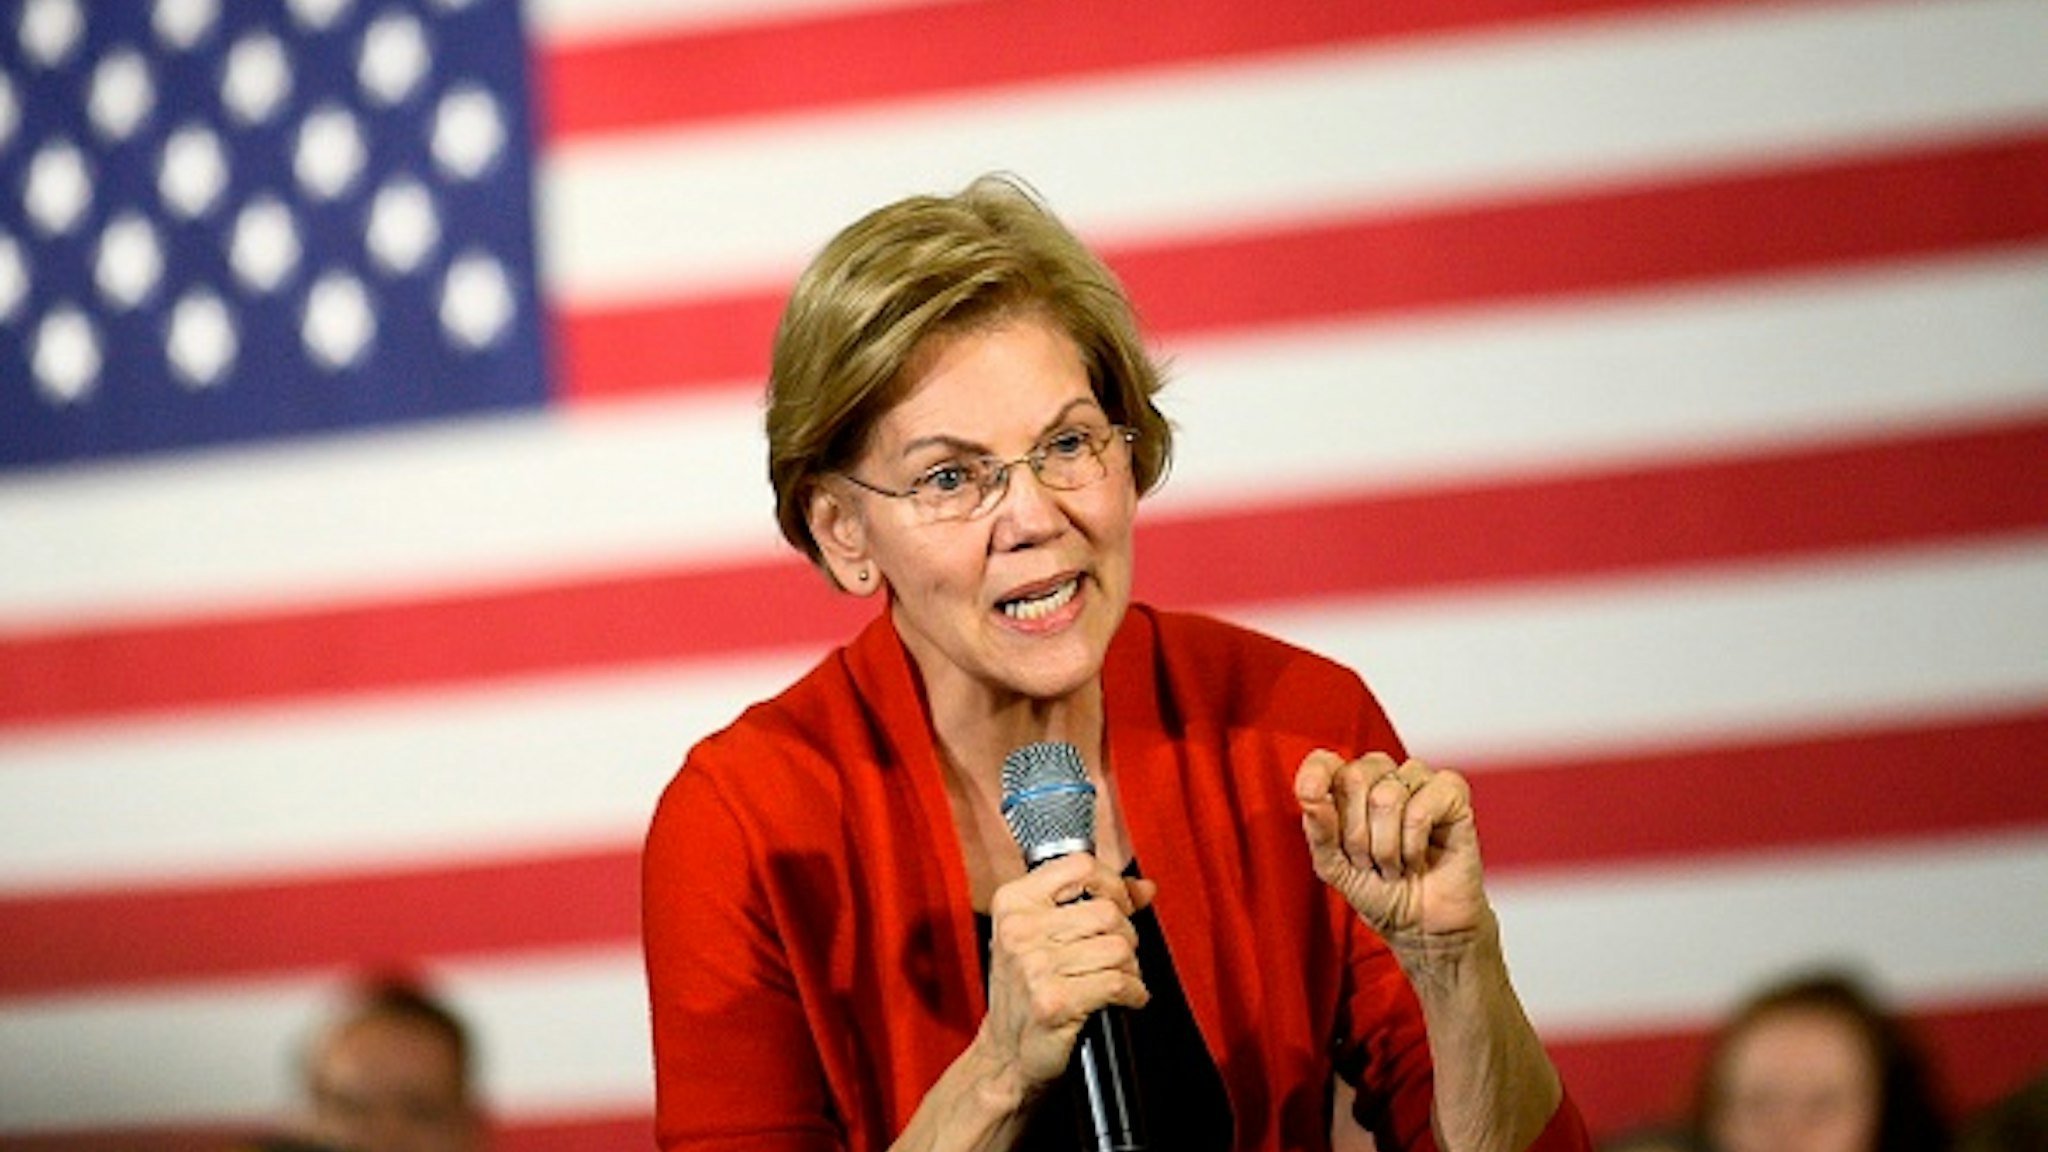 Democratic presidential candidate Senator Elizabeth Warren (D-MA) speaks during a campaign stop in Cedar Rapids, Iowa on January 26, 2020. - Warren and other Democratic candidates, are making their final push through Iowa before the caucuses on February 3, 2020.